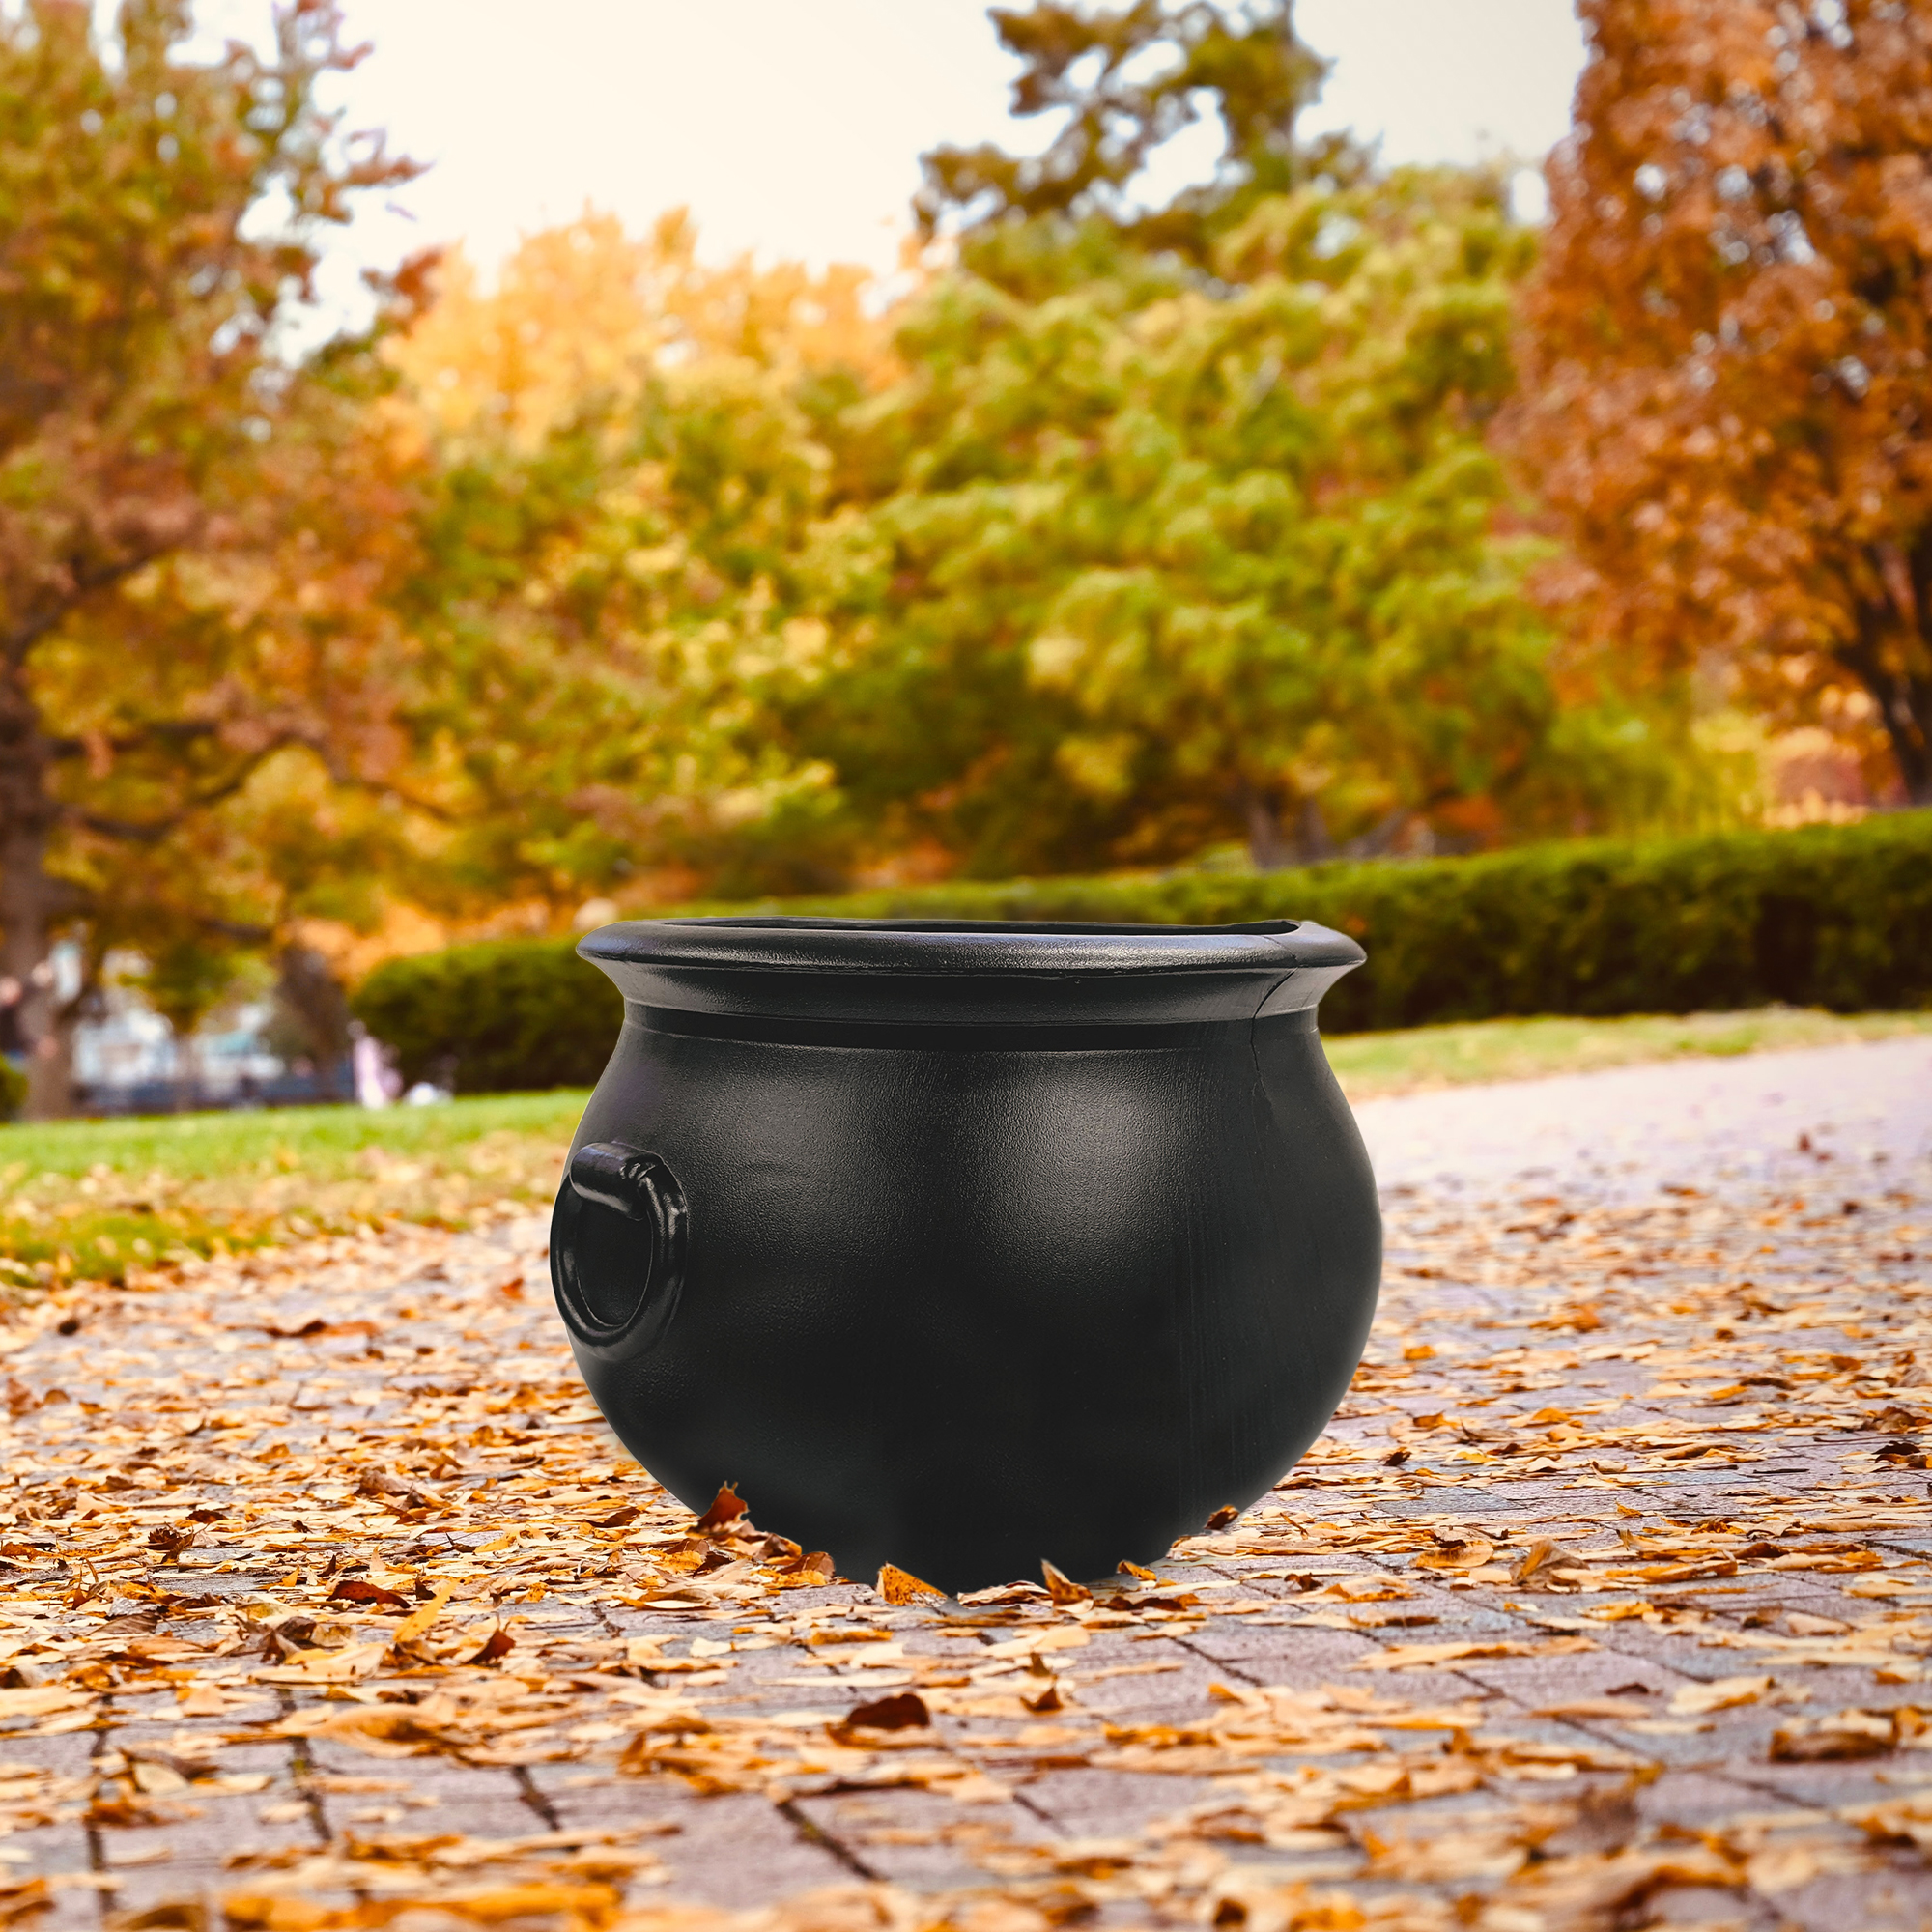 Union Products 16 inch x 12 inch Witch Cauldron Halloween Decoration, Black - image 6 of 6